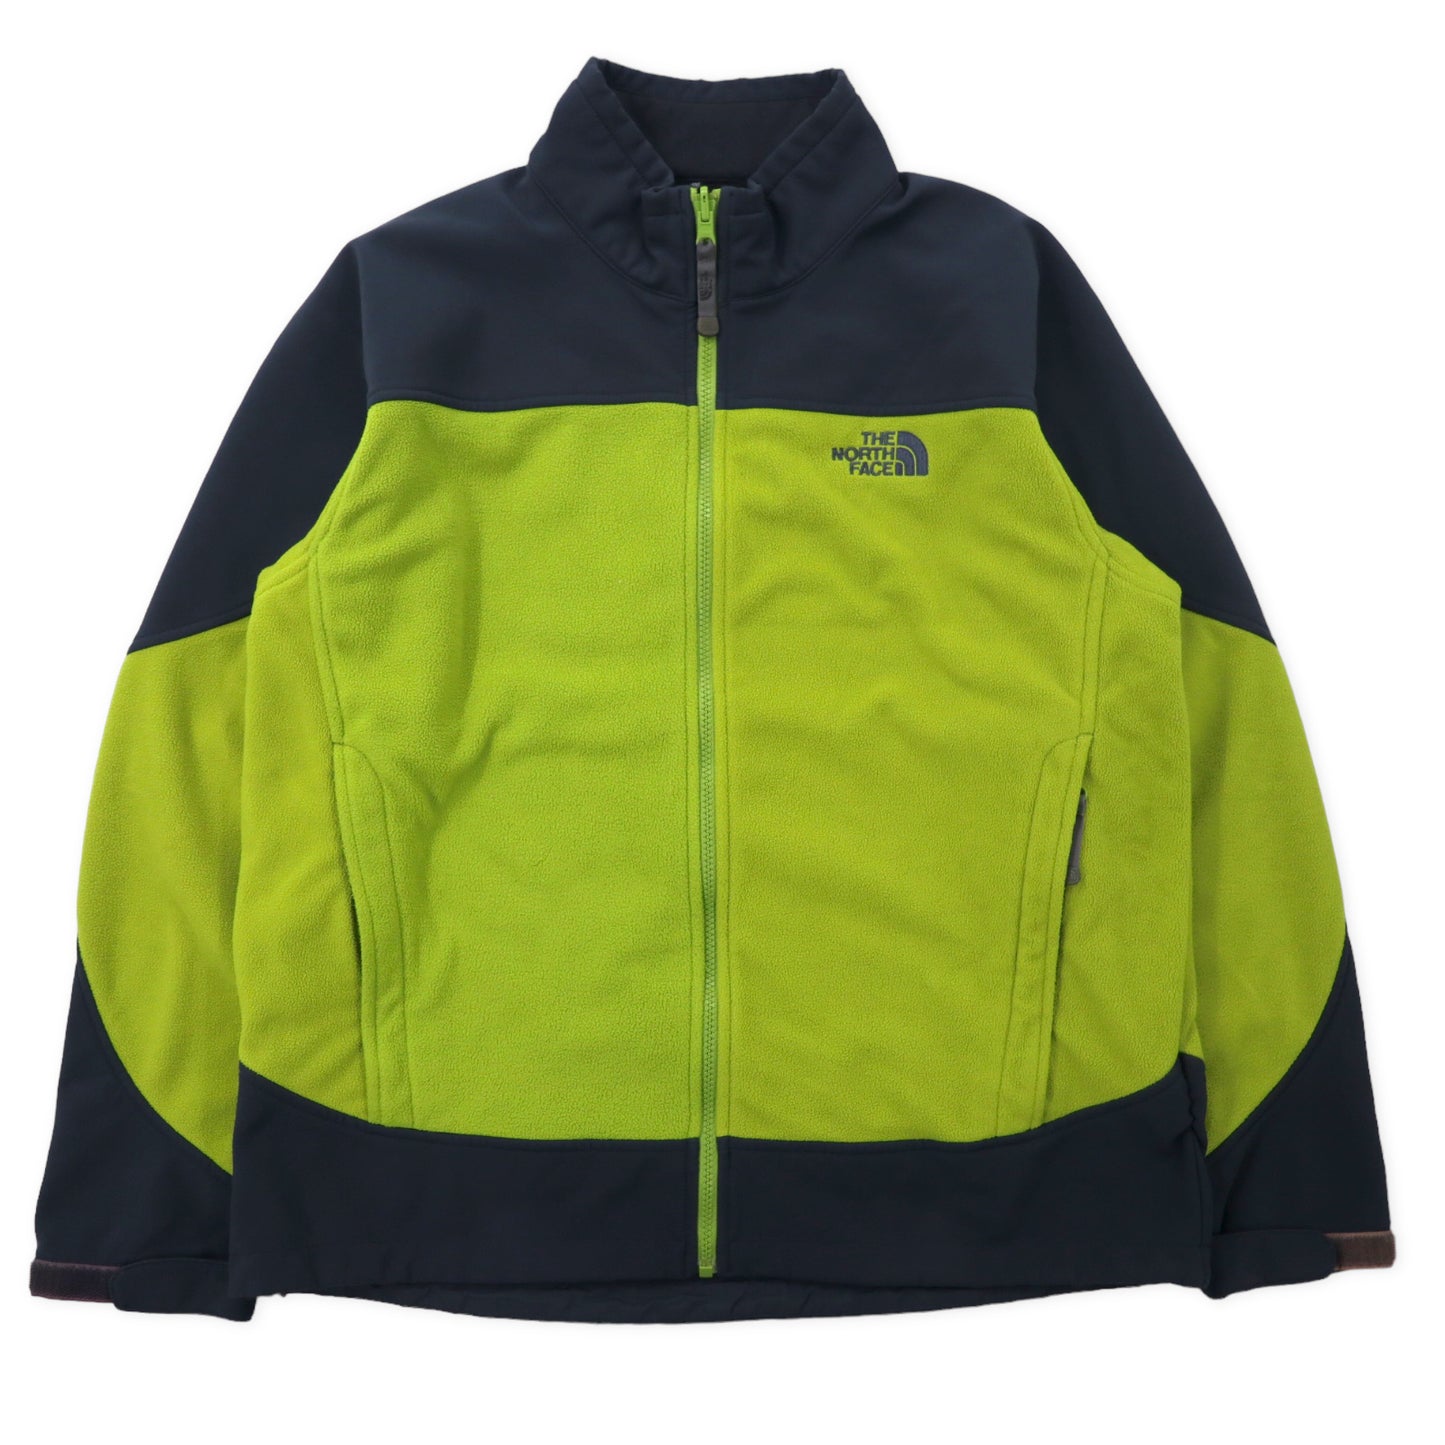 THE NORTH FACE Wind stopper FLEECE Jacket L Green Gray Polyester logo  embroidery Windstopper